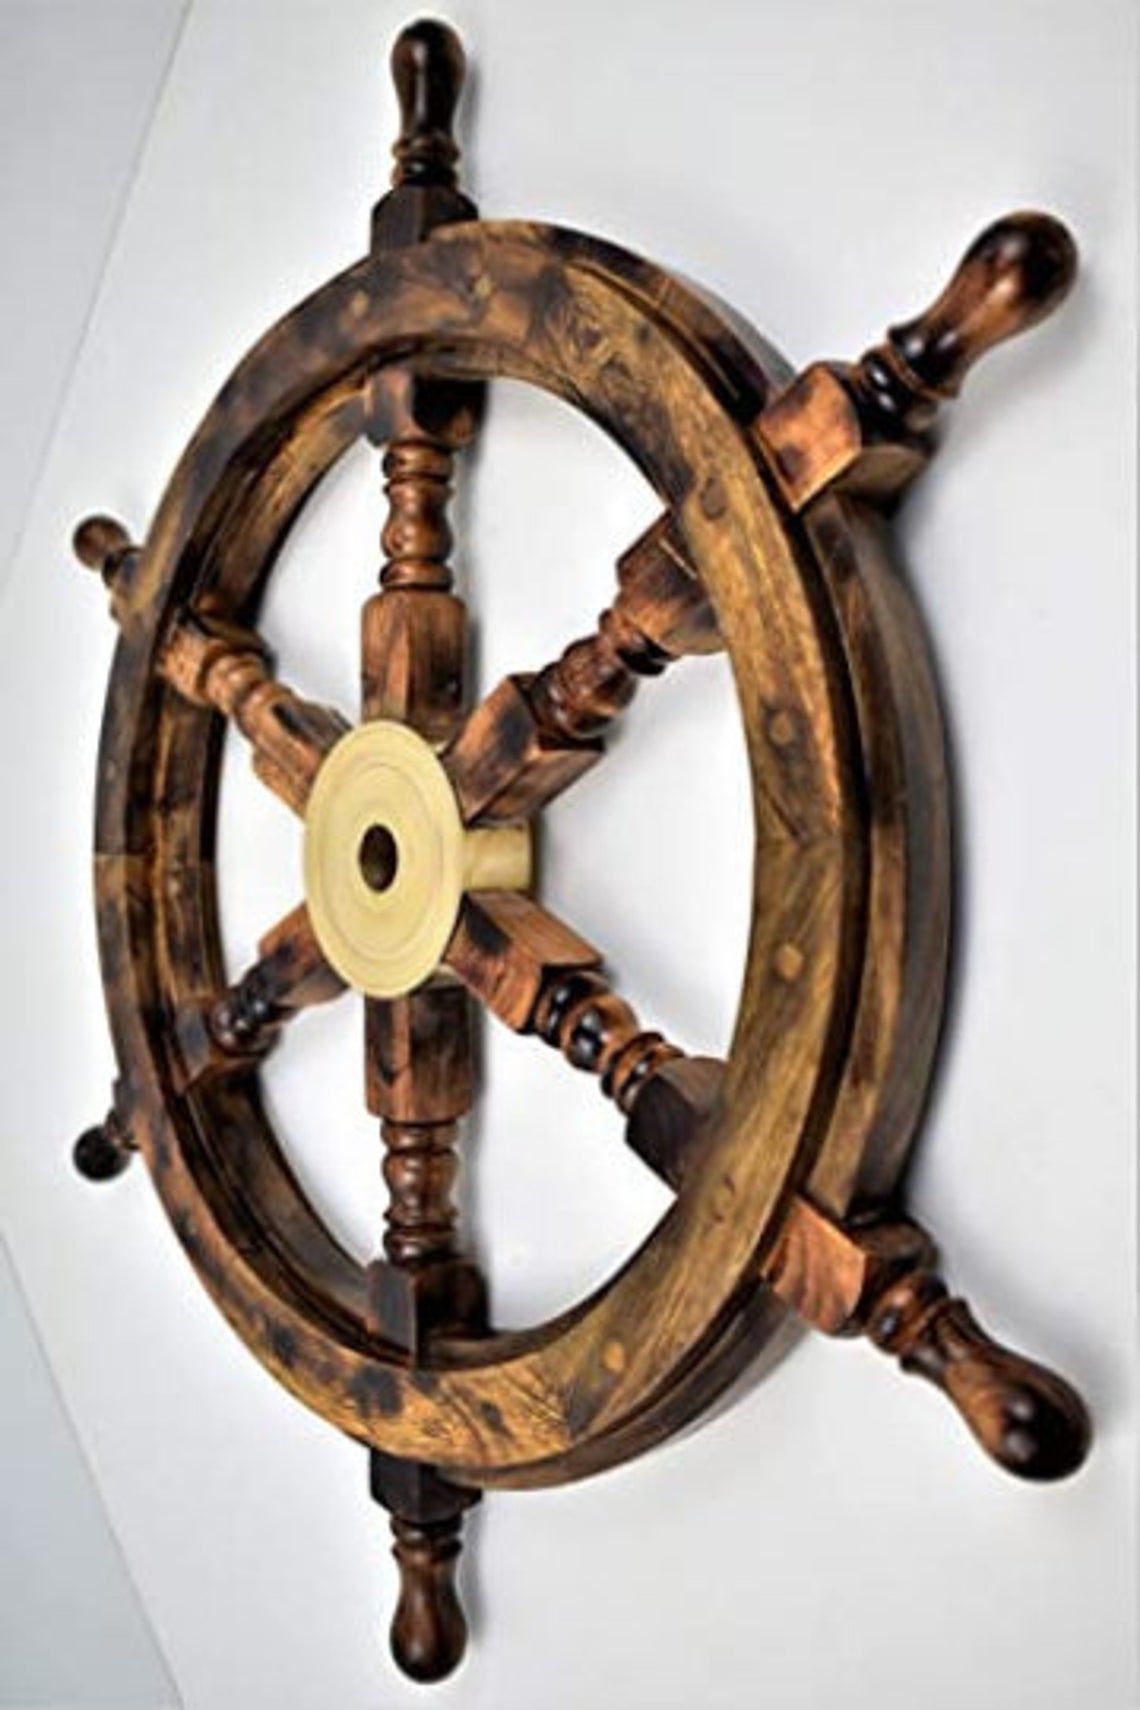 30'' Burned Heat Tempered Wall Hanging wooden ship wheel